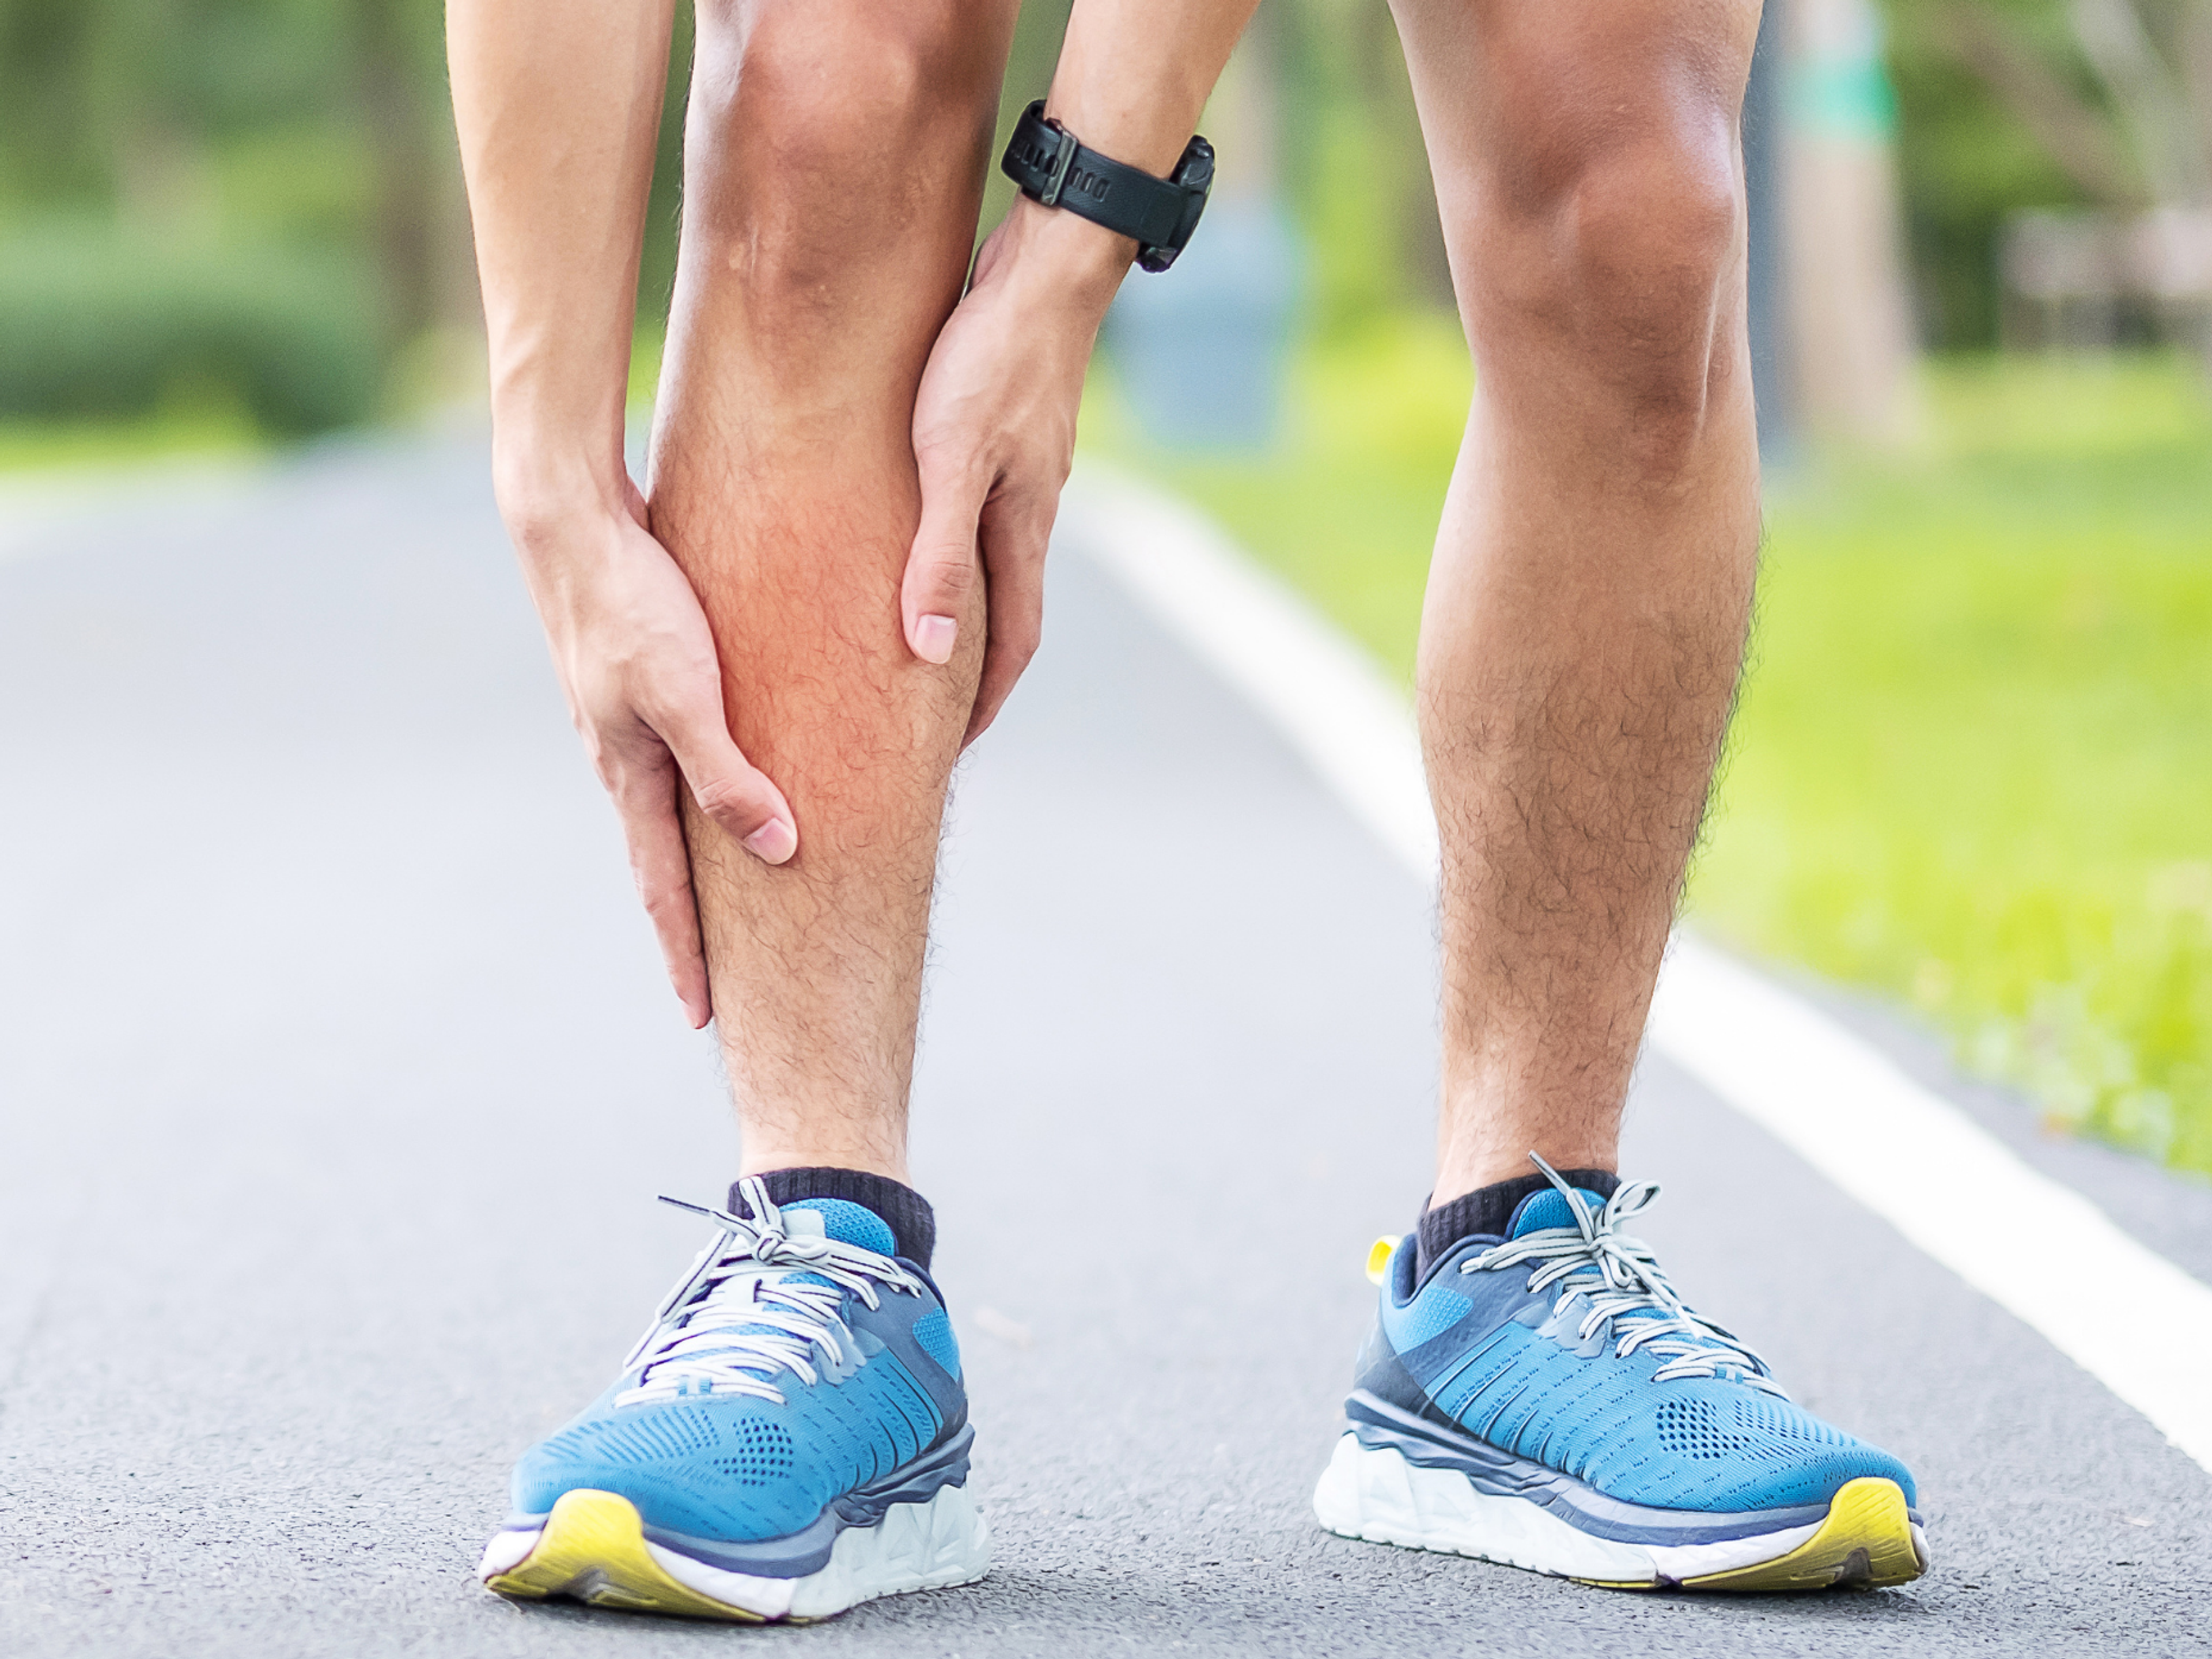 Shin splints is an example of a running overuse injury in the lower leg.